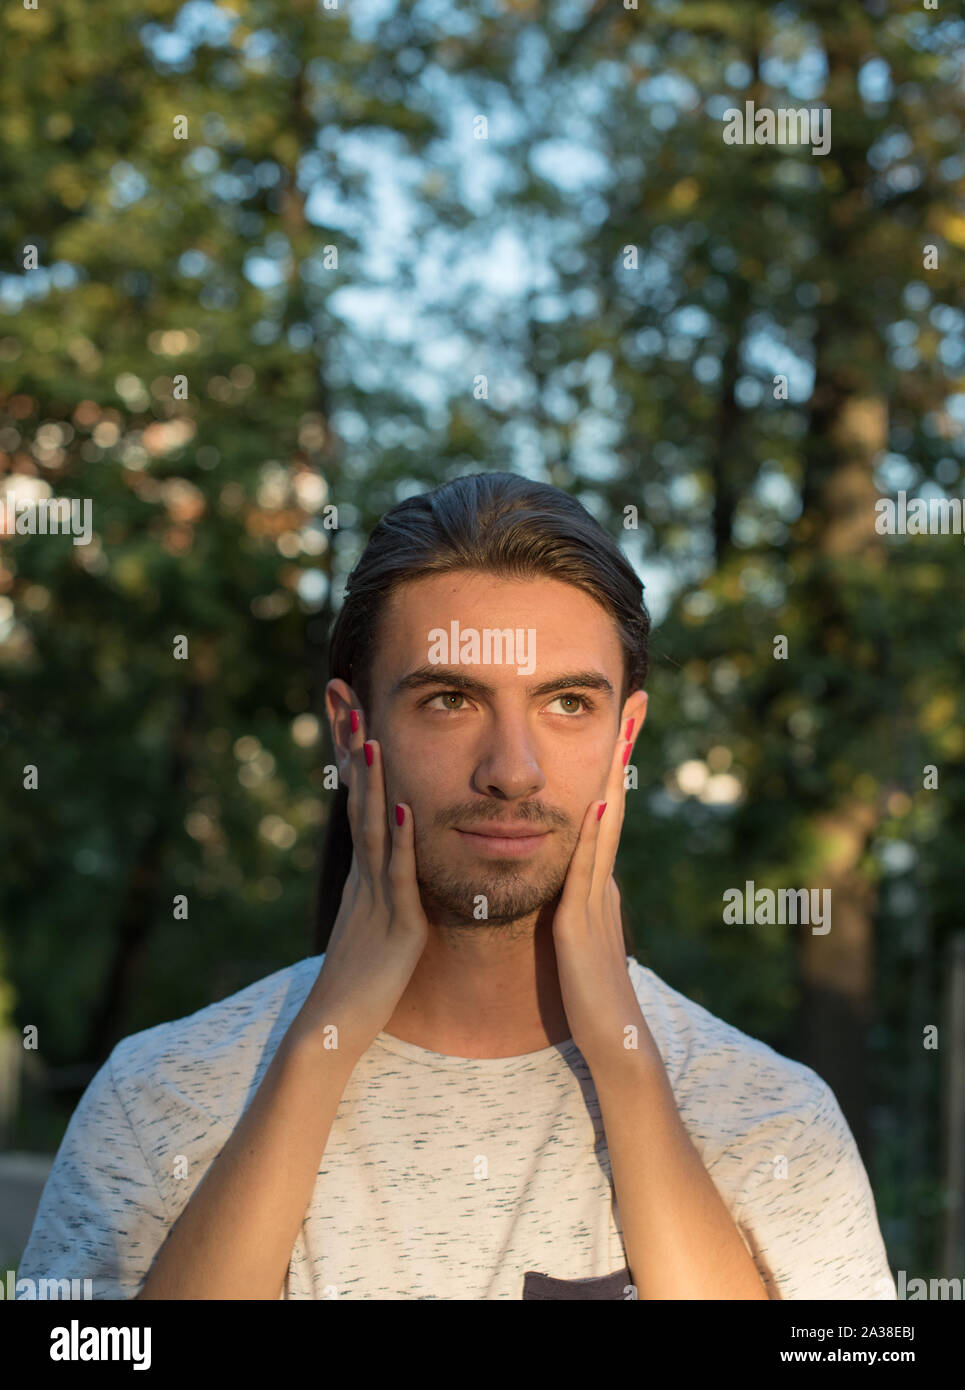 Woman's hands on a man's face Stock Photo